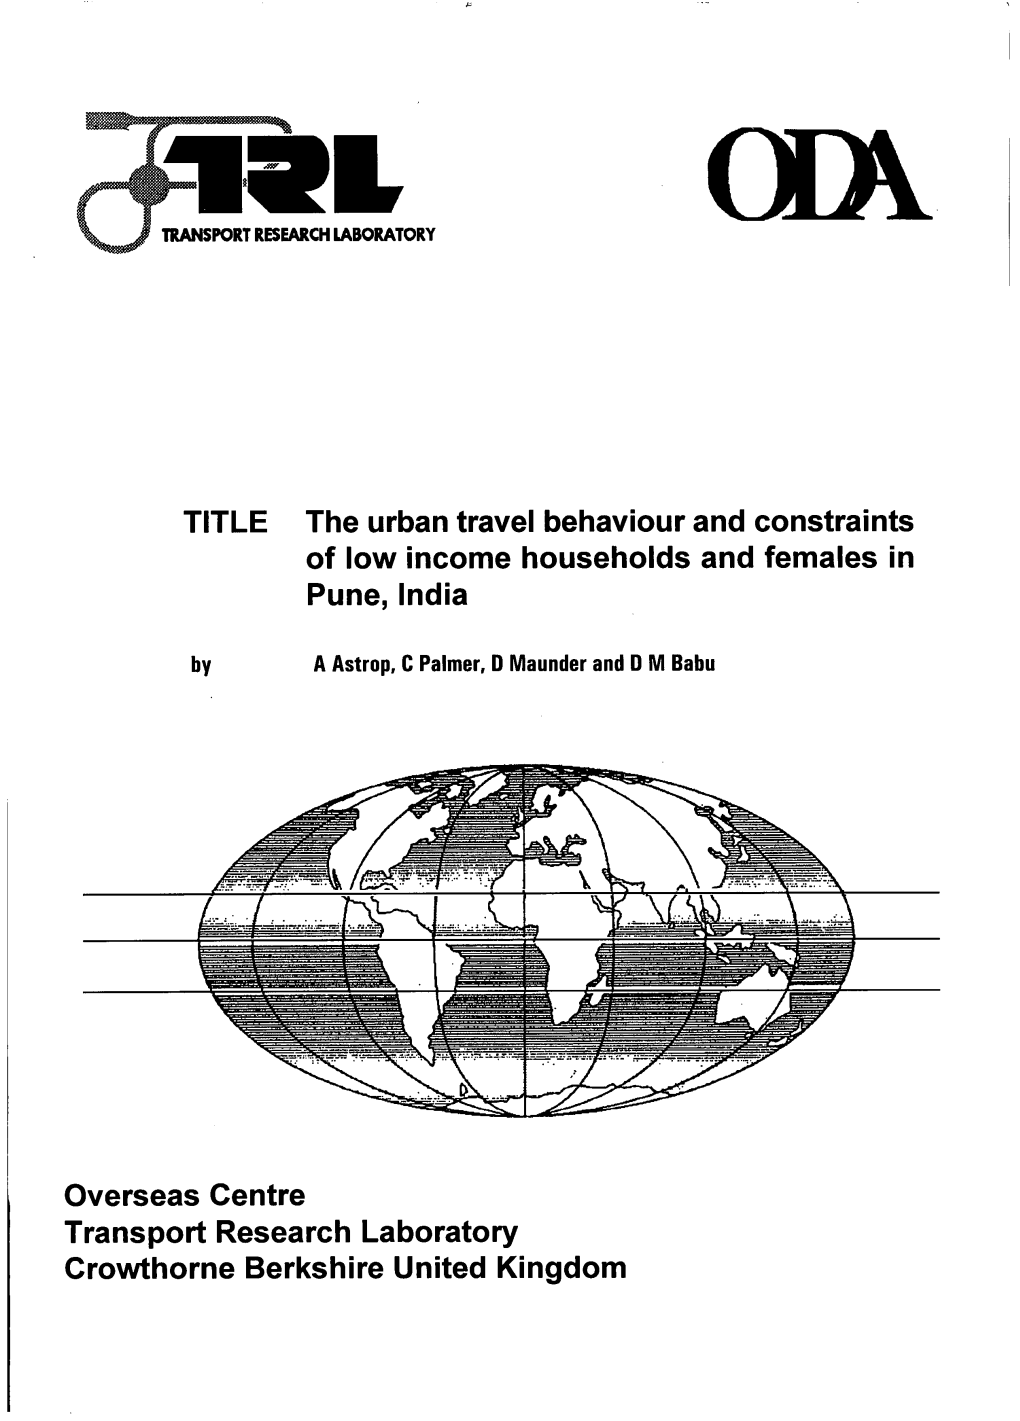 The Urban Travel Behaviour of Low Income Households and Females In